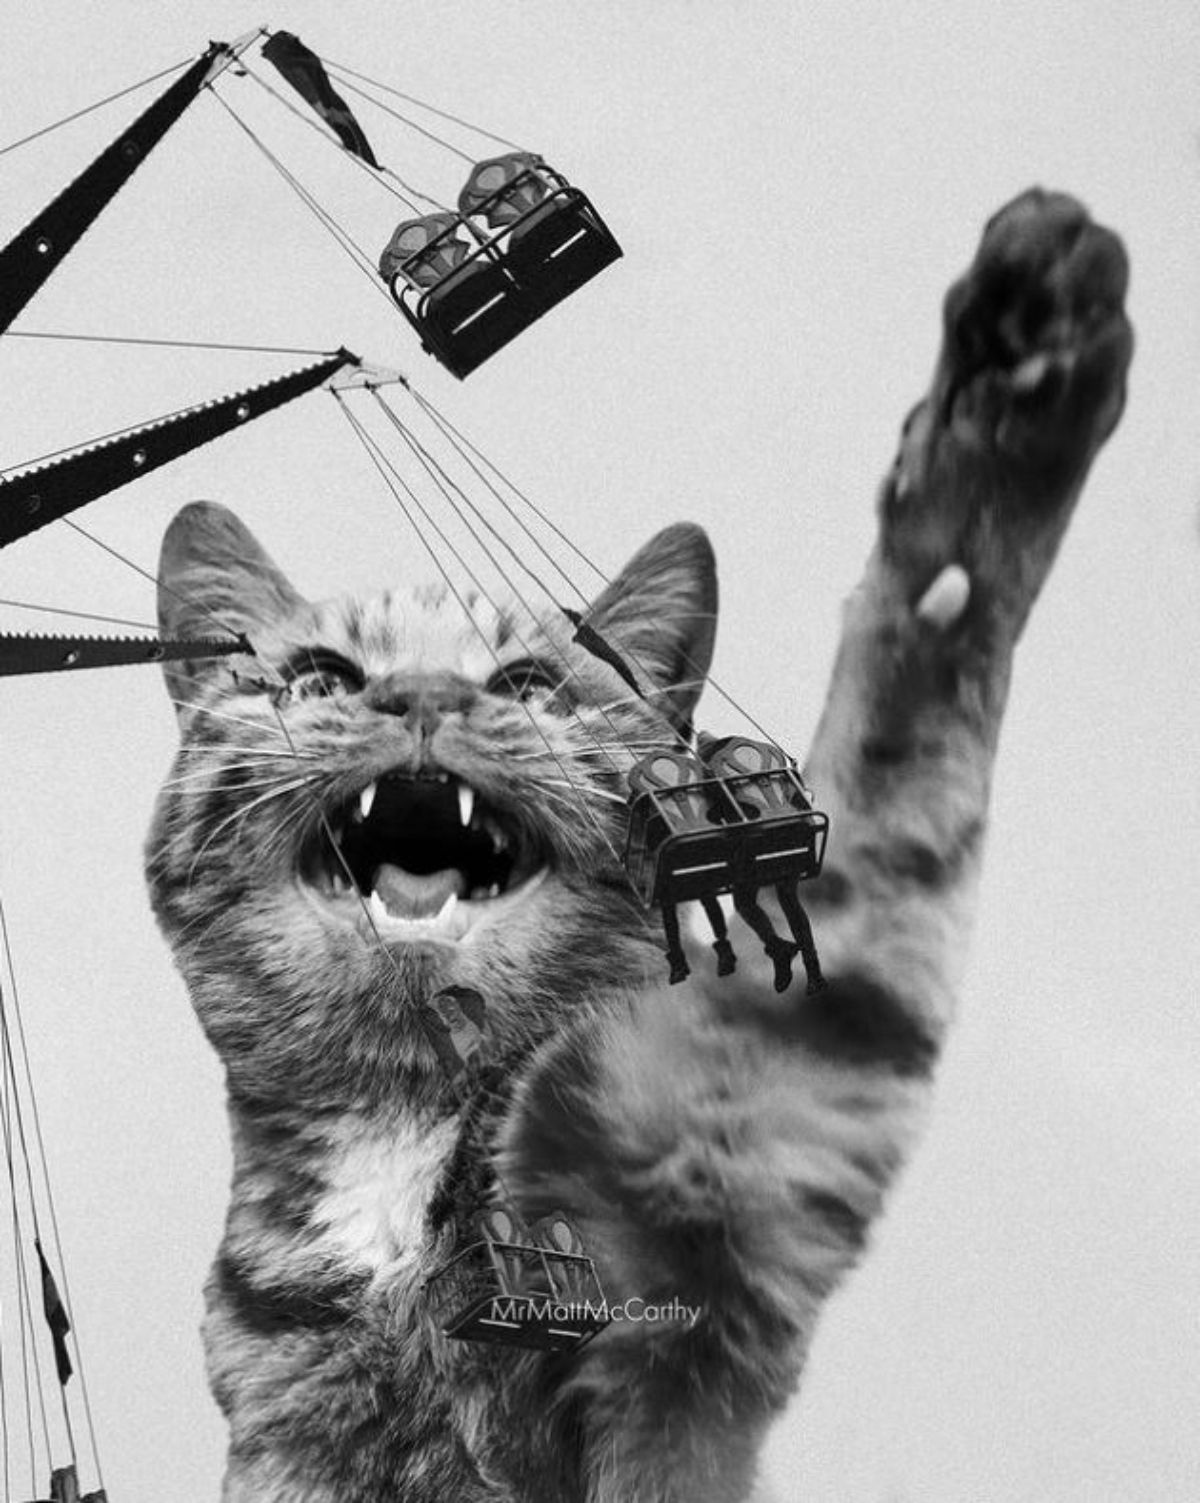 black and white image of large photoshopped cat trying to hit at the people on the ferris wheel